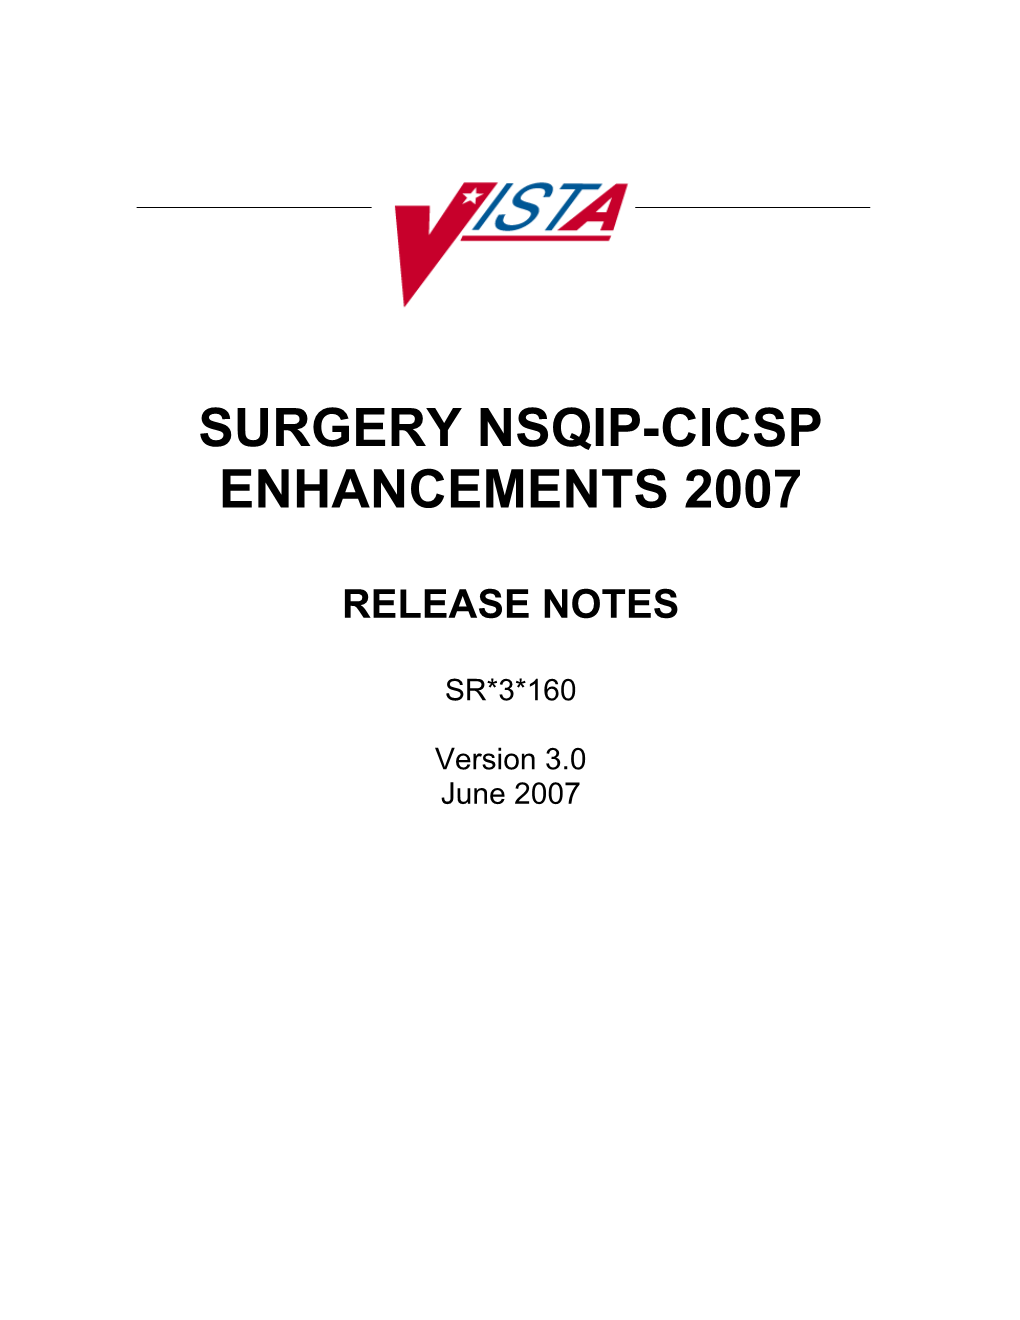 Surgery NSQIP-CICSP 2007 Release Notes